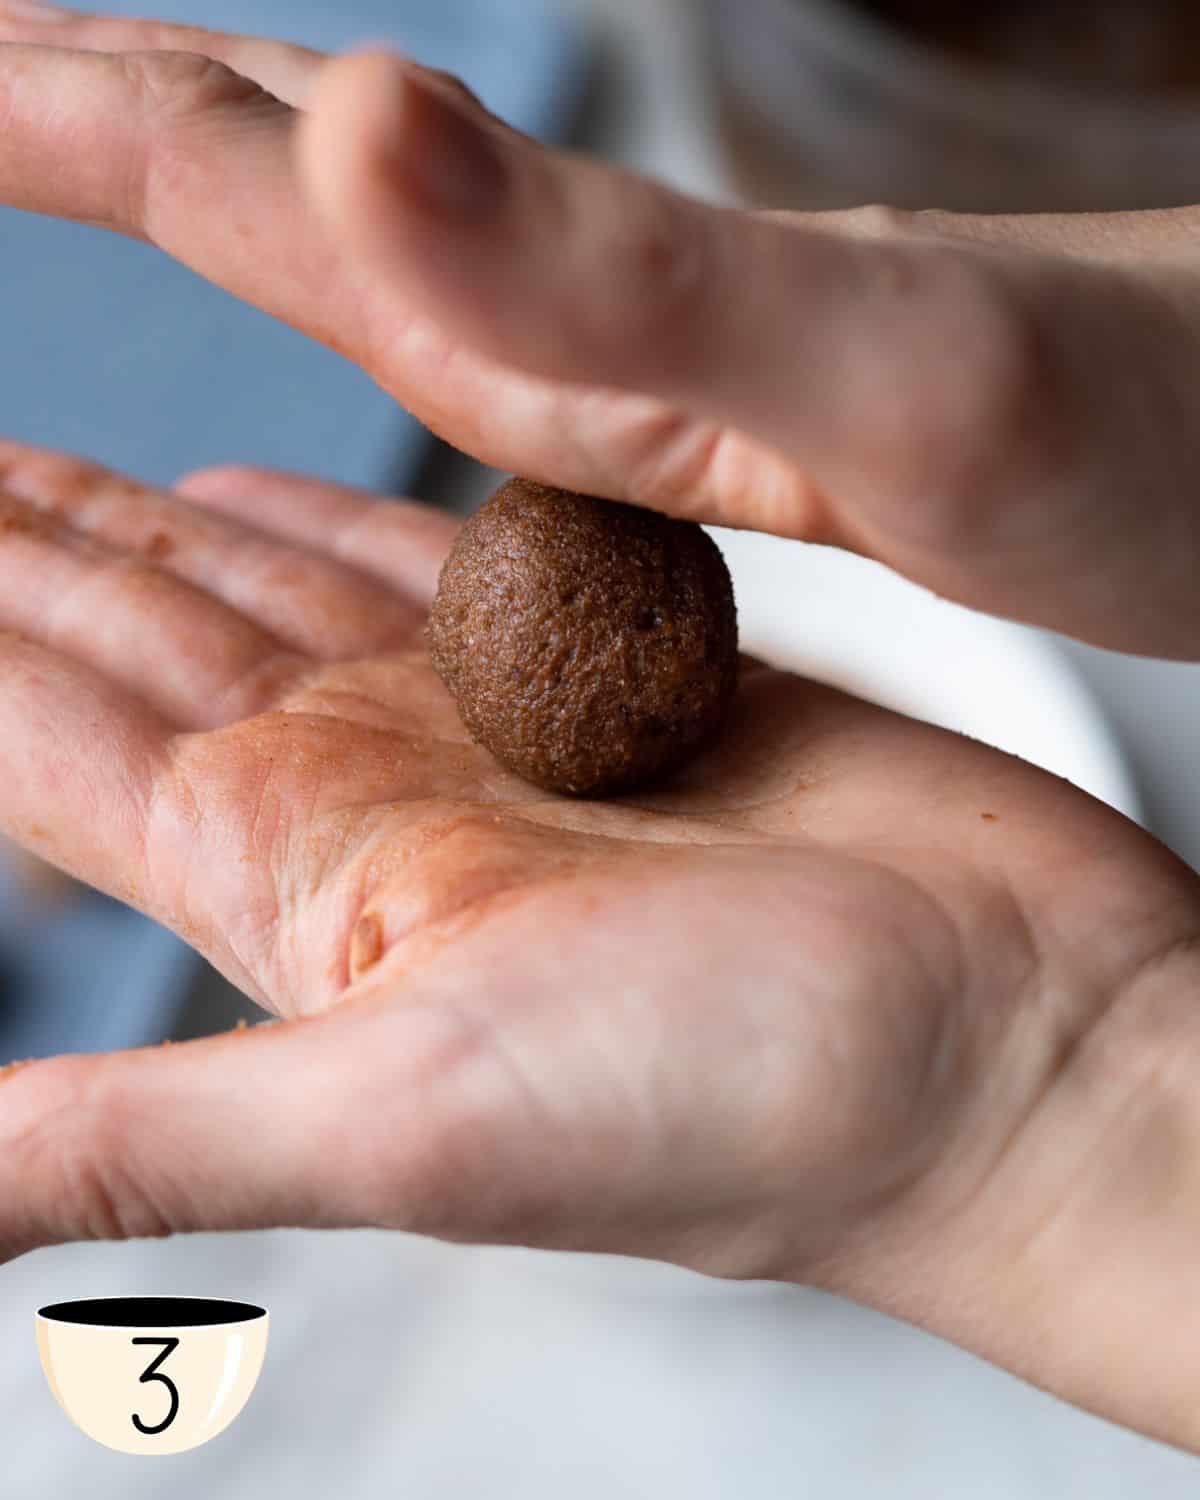 A close-up of a hand shaping the chocolate mixture into a small, round bliss ball, demonstrating a step in preparing this healthy snack for kids.